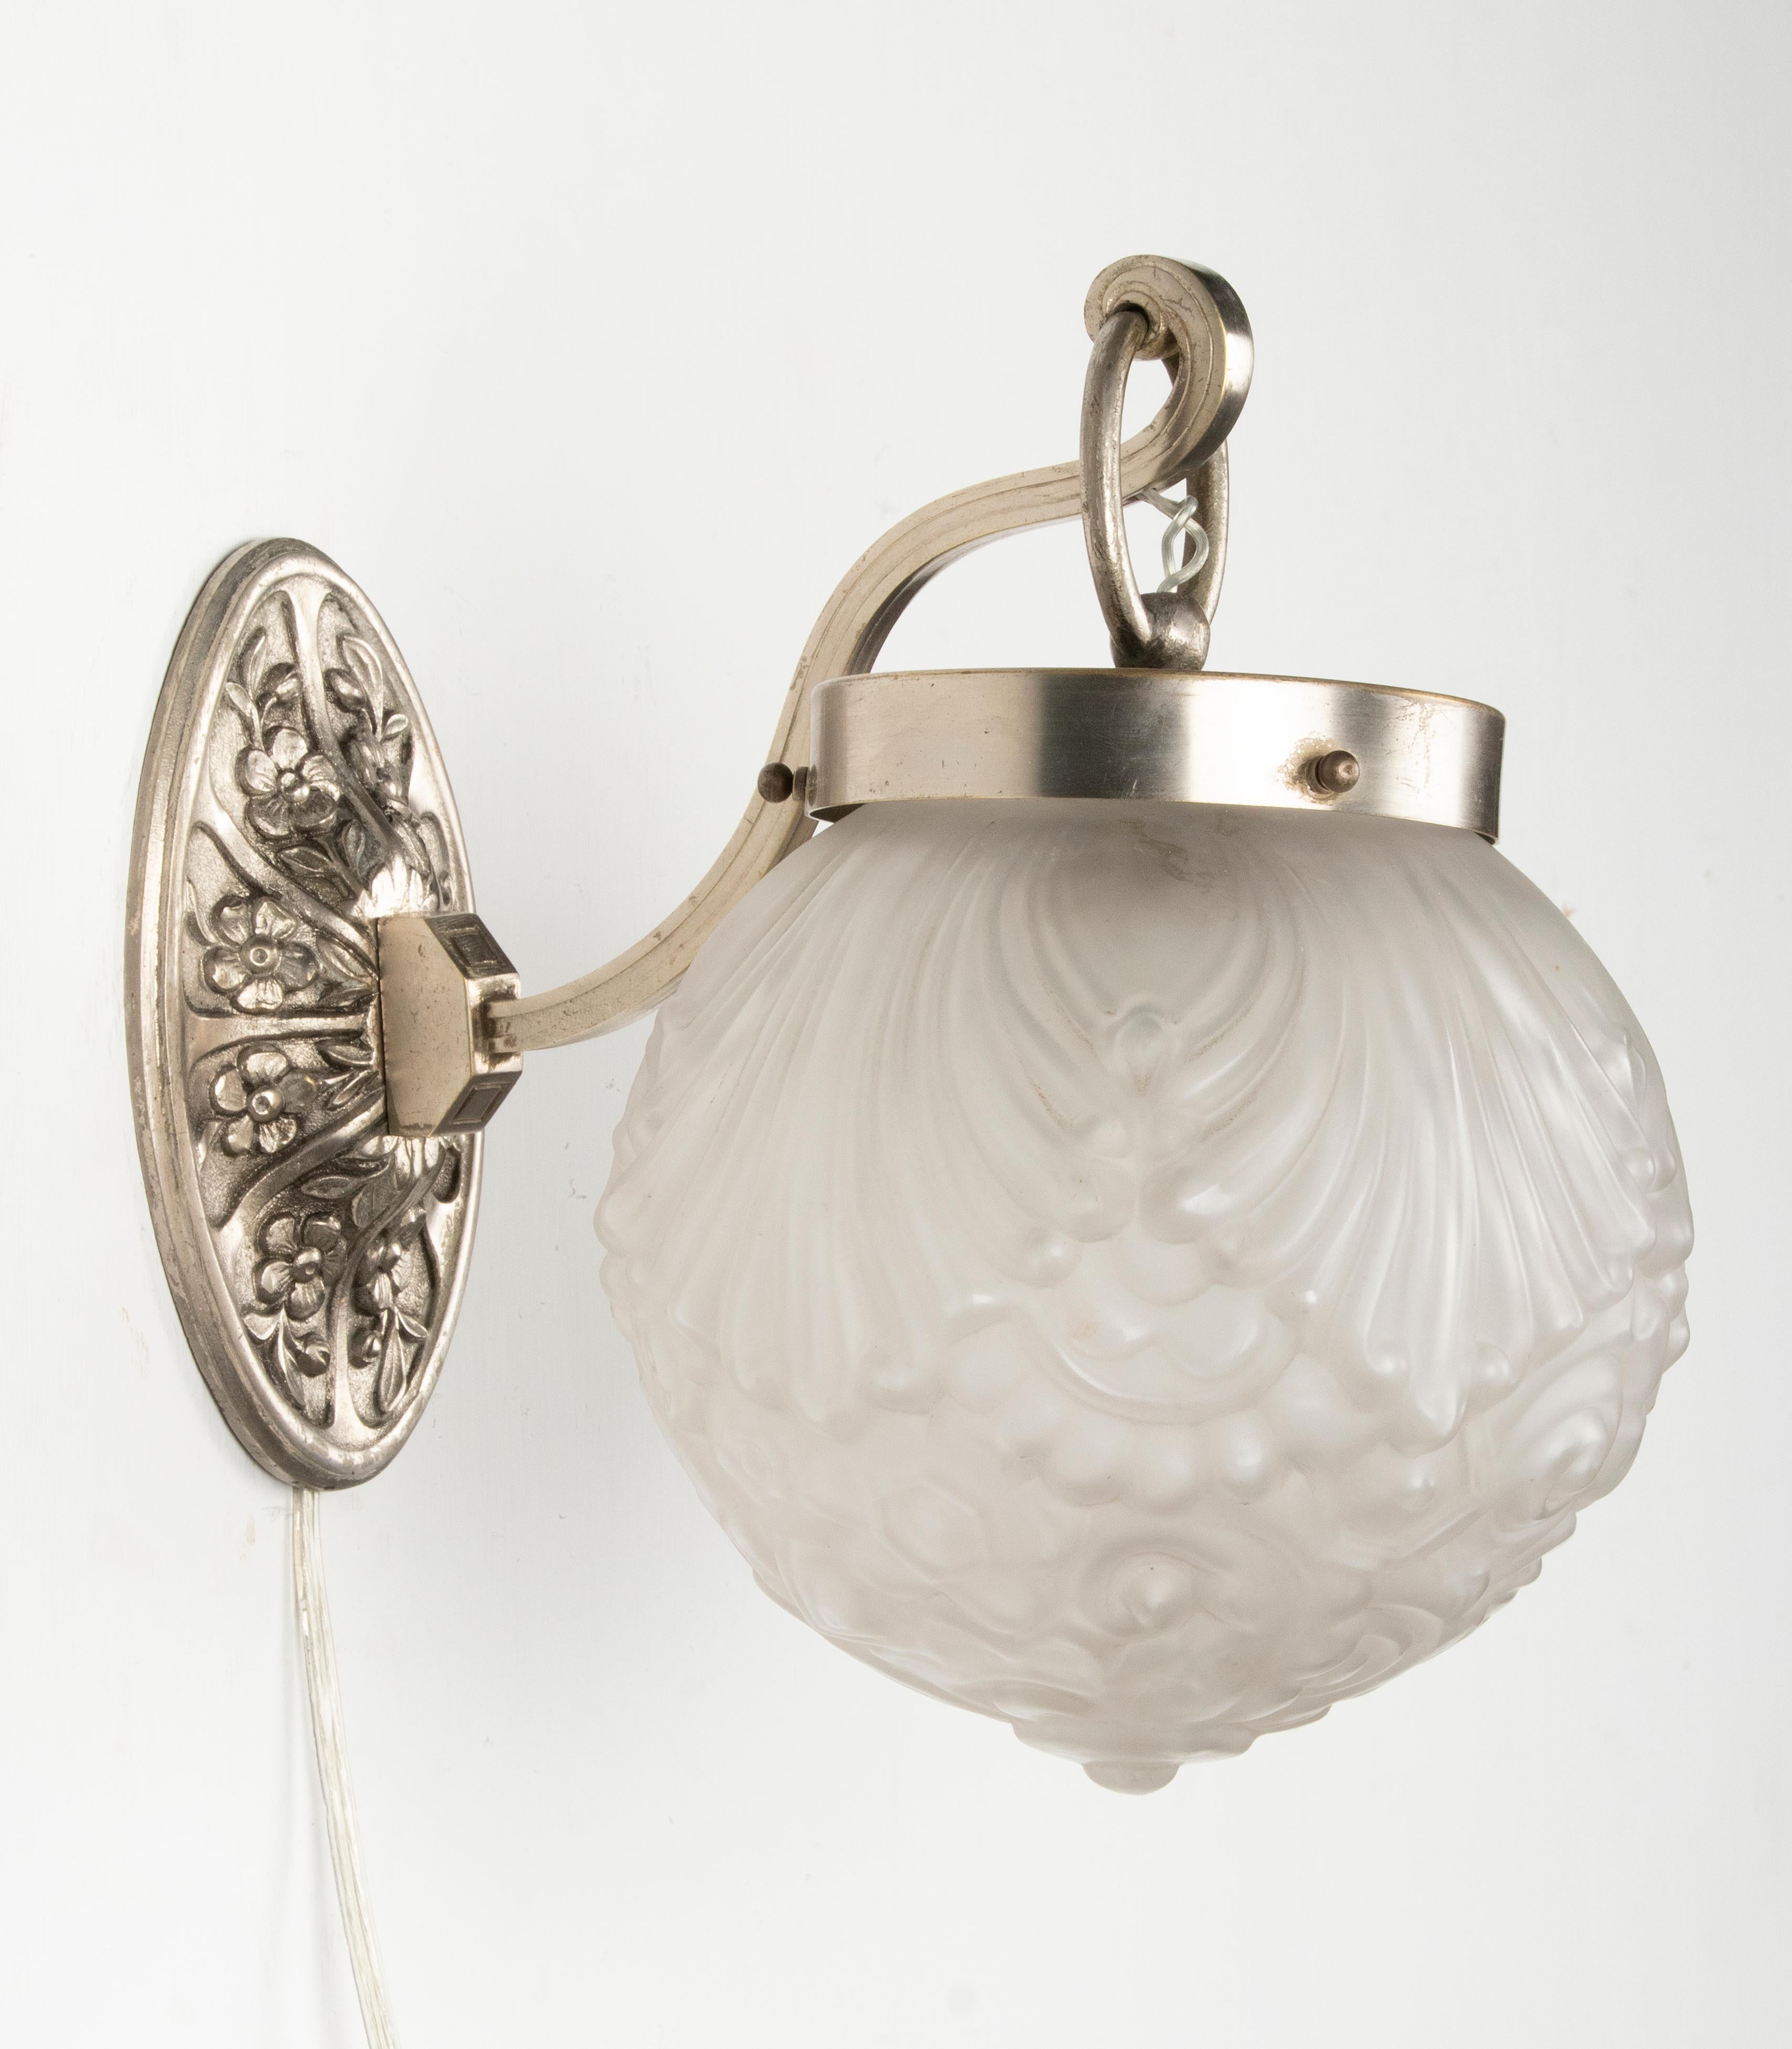 A small but stylish wall lamp made of nickel-plated brass. The wall support has a floral motif in pure Art Deco style. The lamp is signed on the back: L.B. 